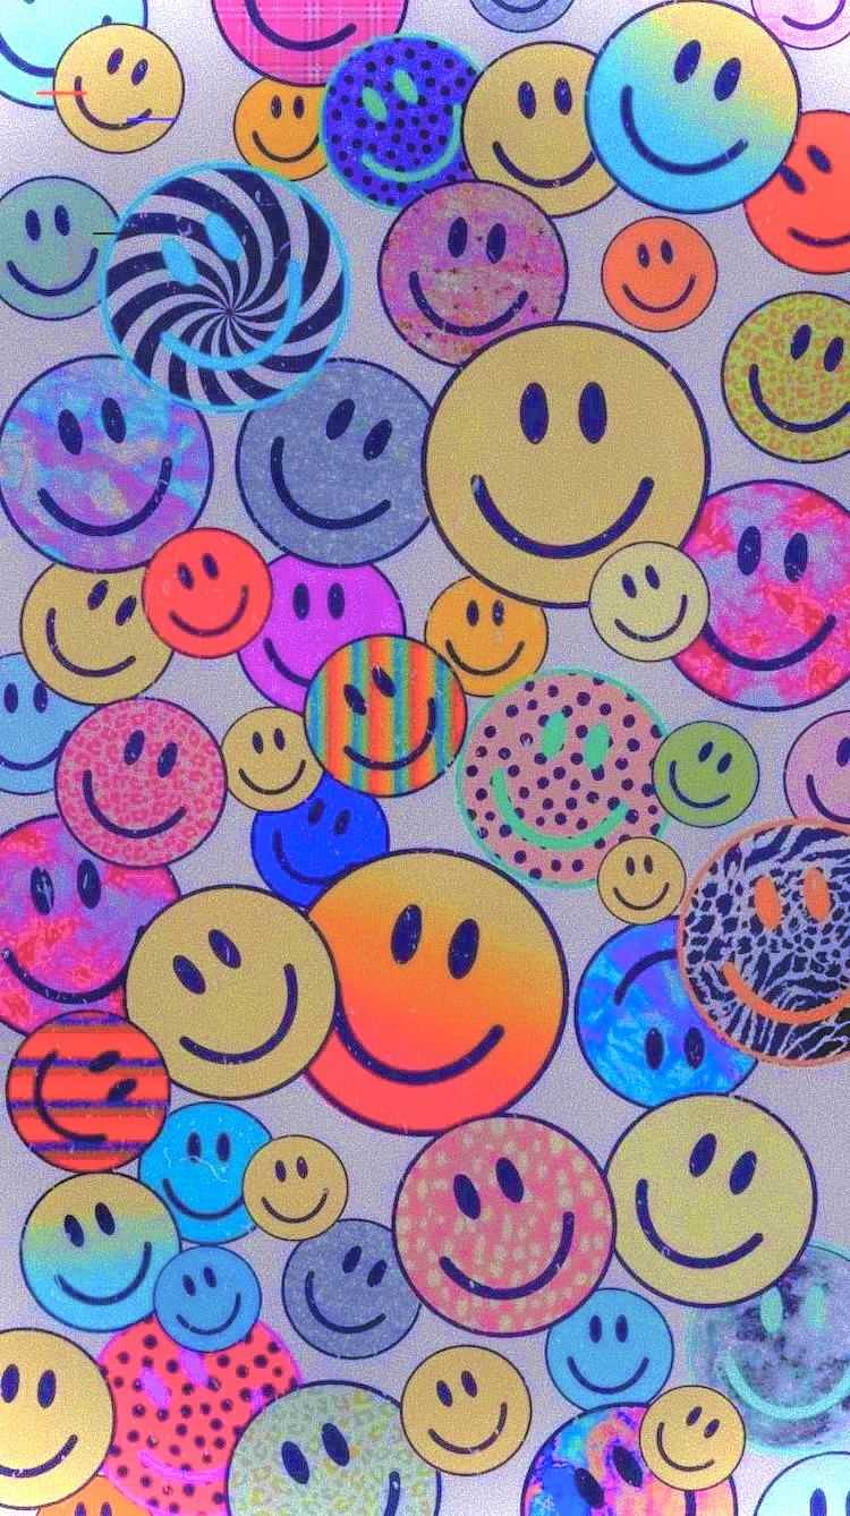 woopme 14Pcs Cute Decorative Smiley Emoji Printed Scrapbook Stickers for  Notebooks,Diary Journal,Laptop, Mobiles Boys Girls Kids Multicolored  Printed Stickers (A4 Size) : Amazon.in: Office Products